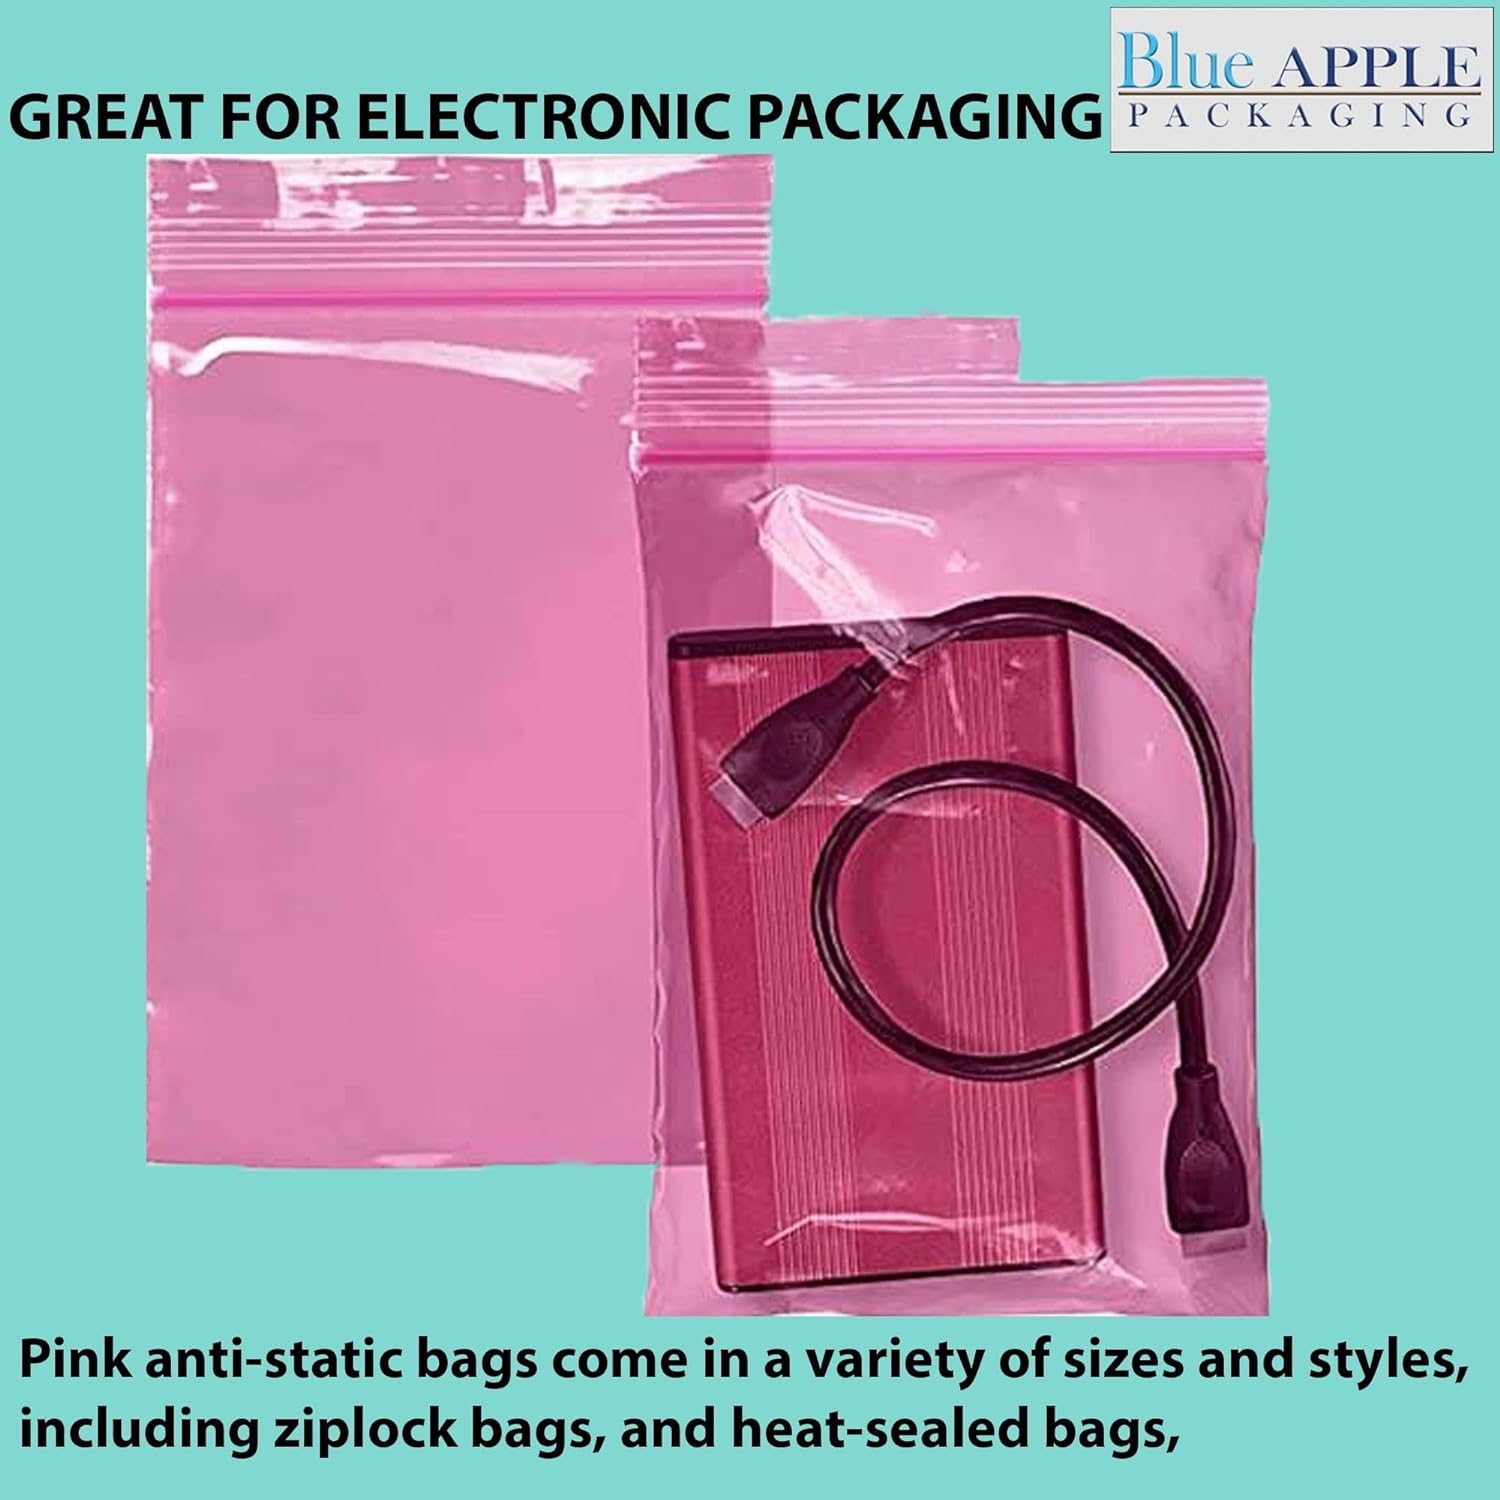 Anti-Static Zip Lock Bags 4 Mil Sizes 2 inch(width) X 3 Inch(height)